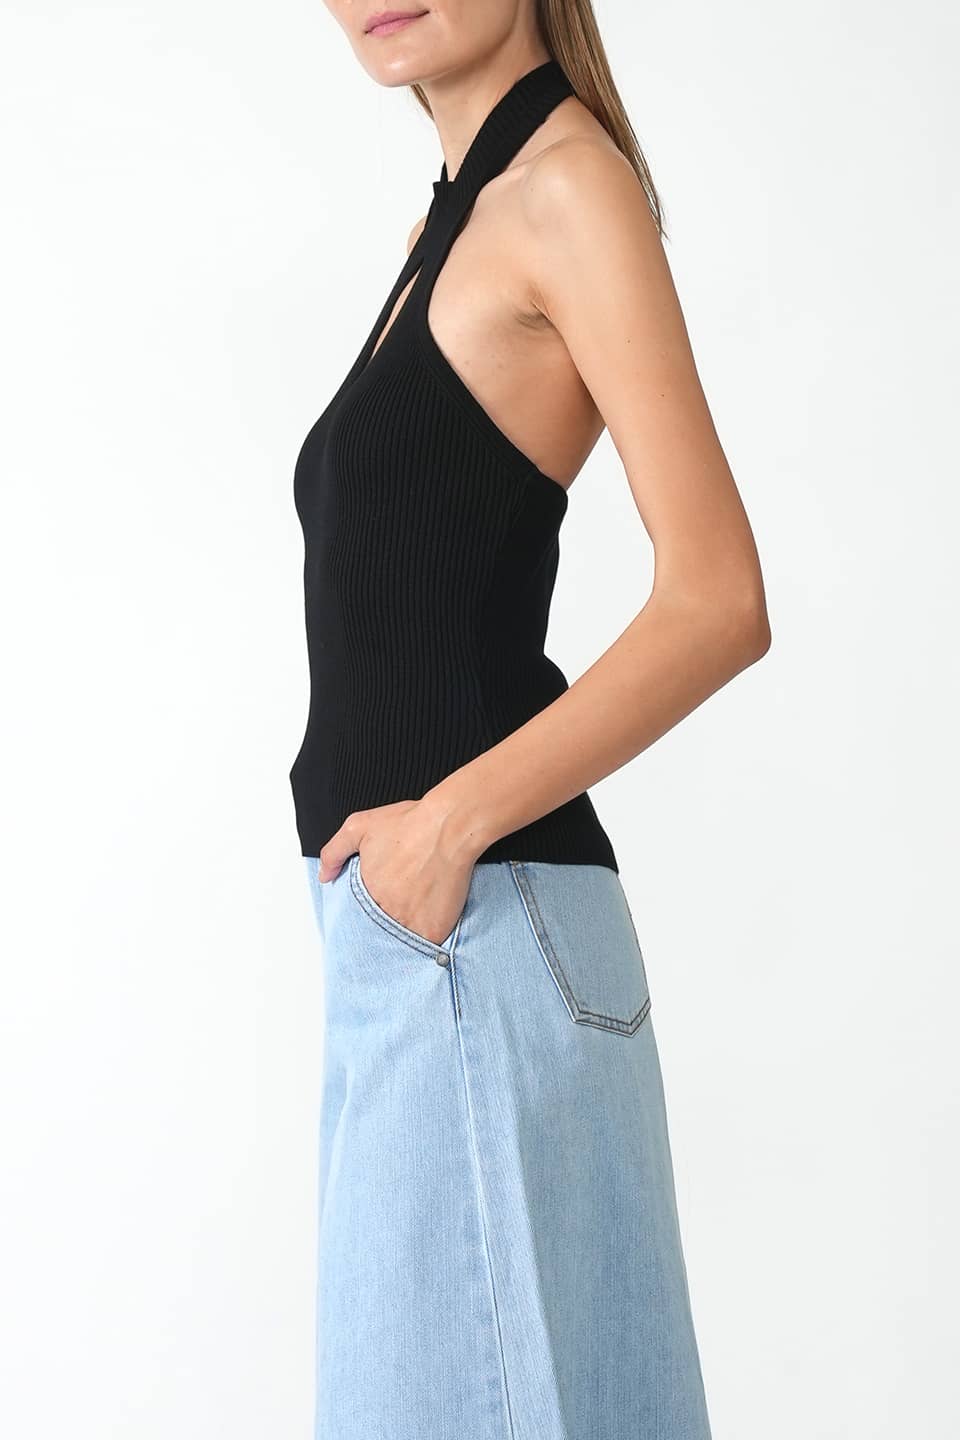 Thumbnail for Product gallery 2, Backless Stretch Top Black